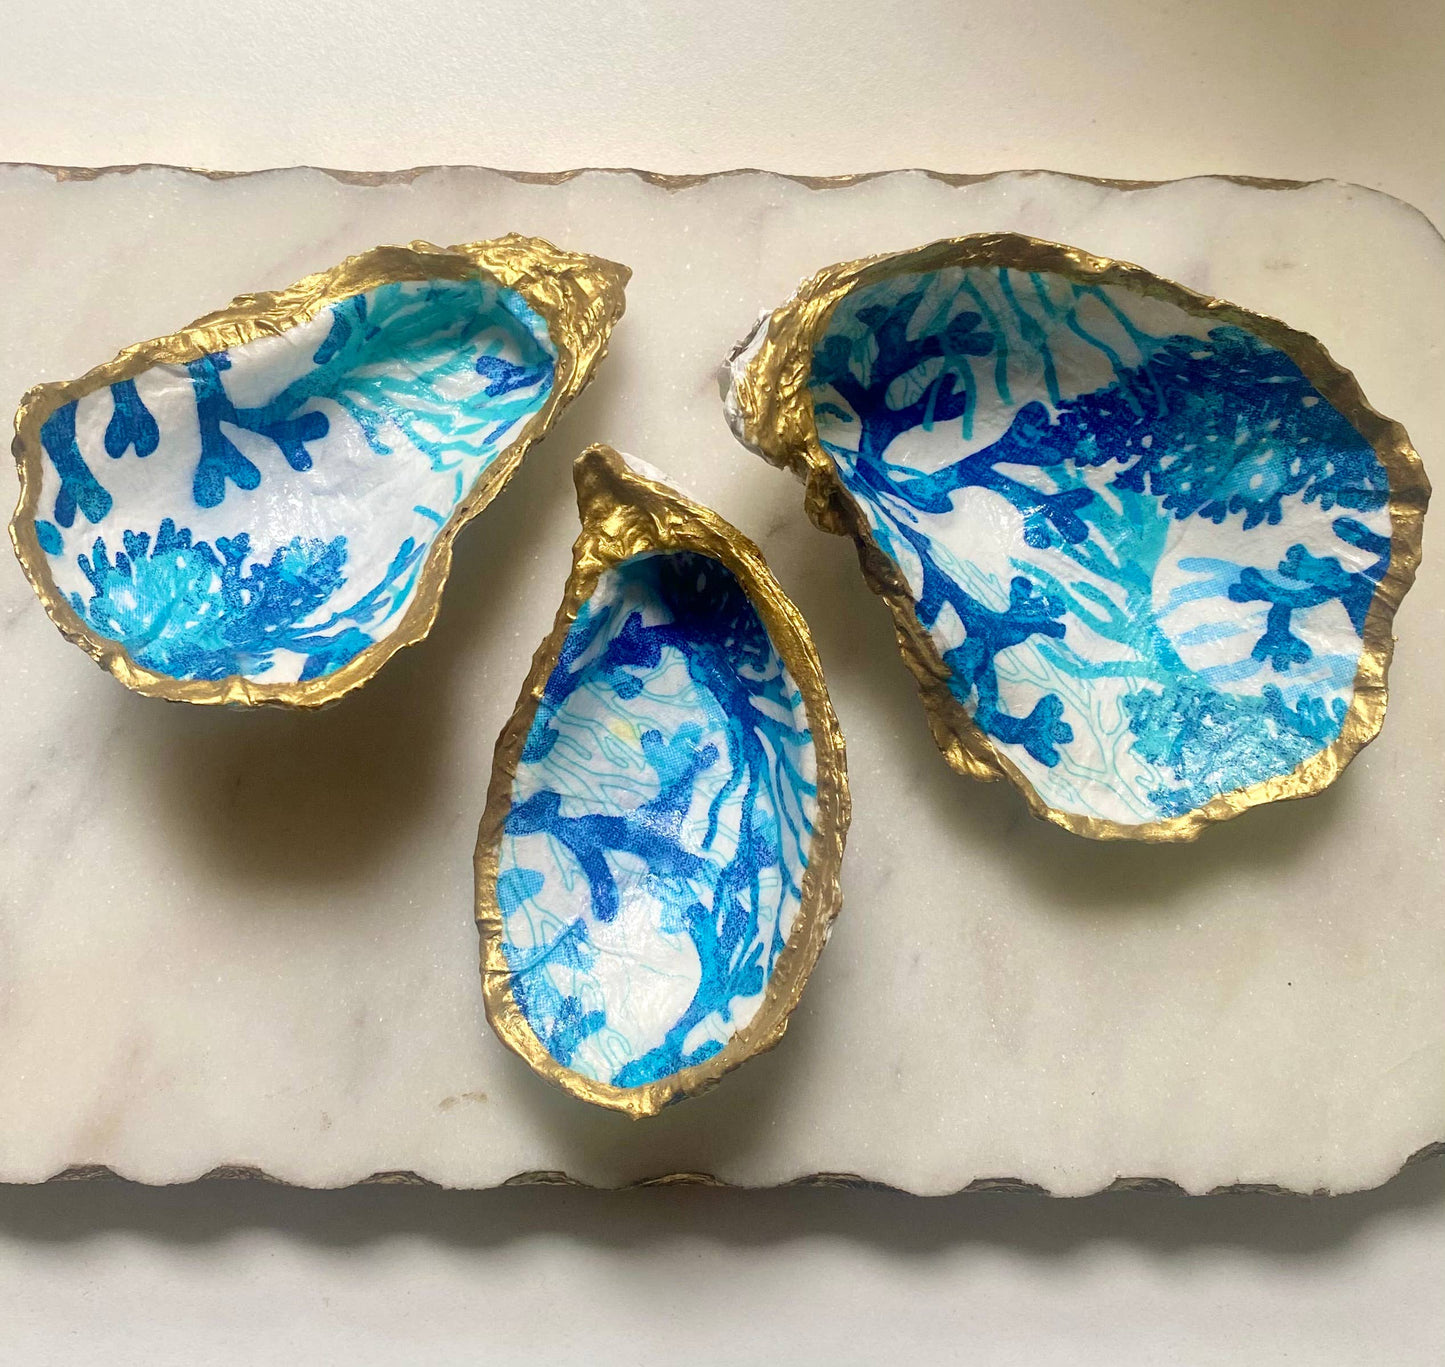 Blue Reef Oyster Shell Jewelry Dish